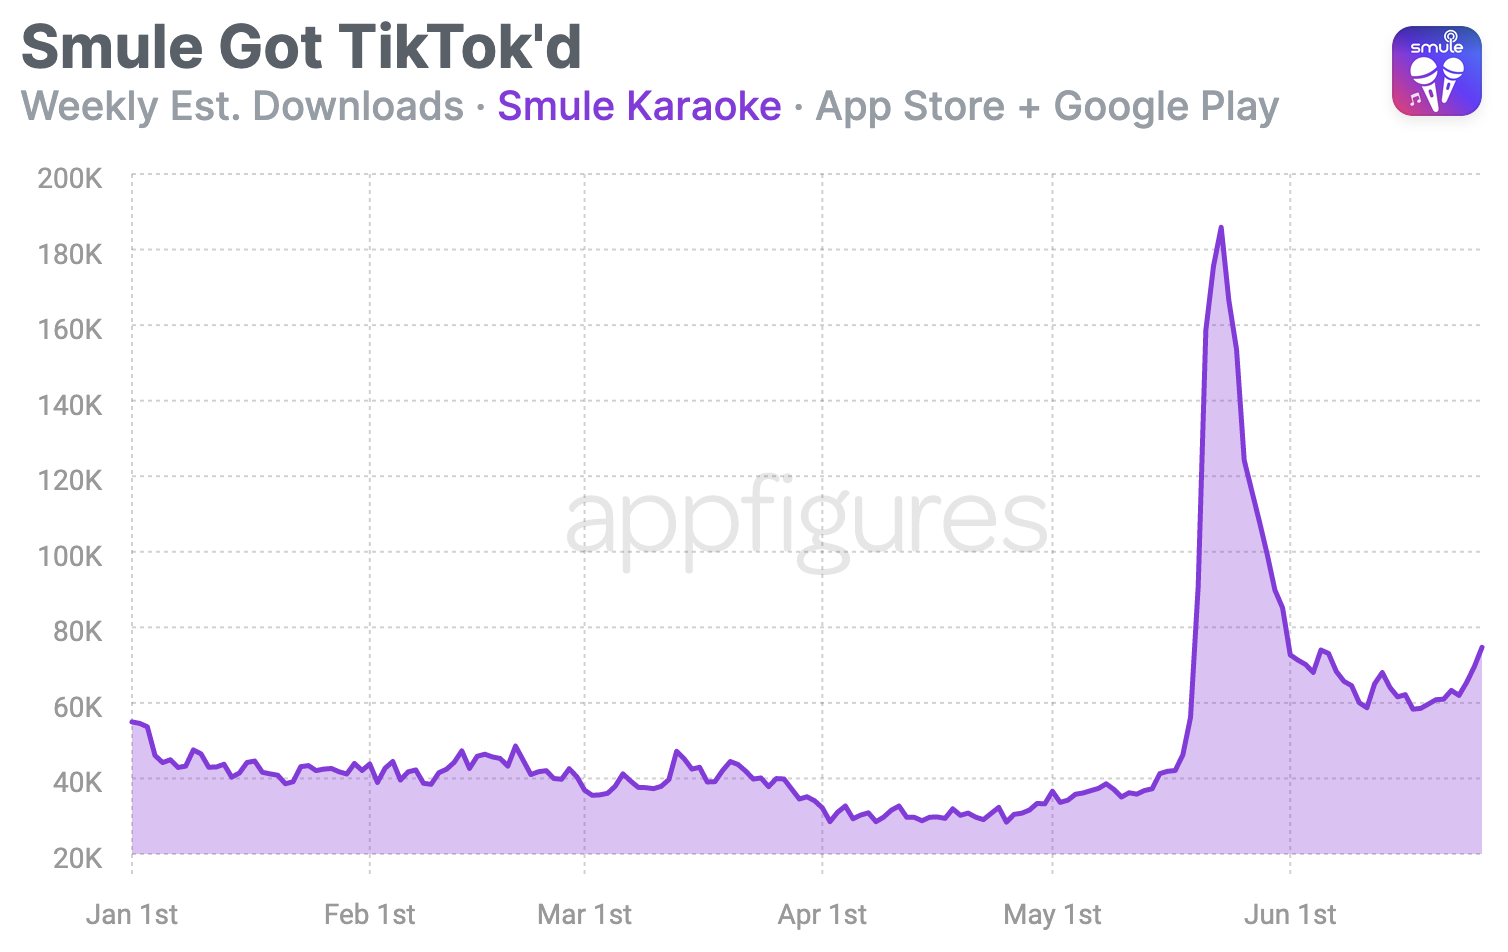 Download estimates for Smule Karaoke on the App Store and Google Play